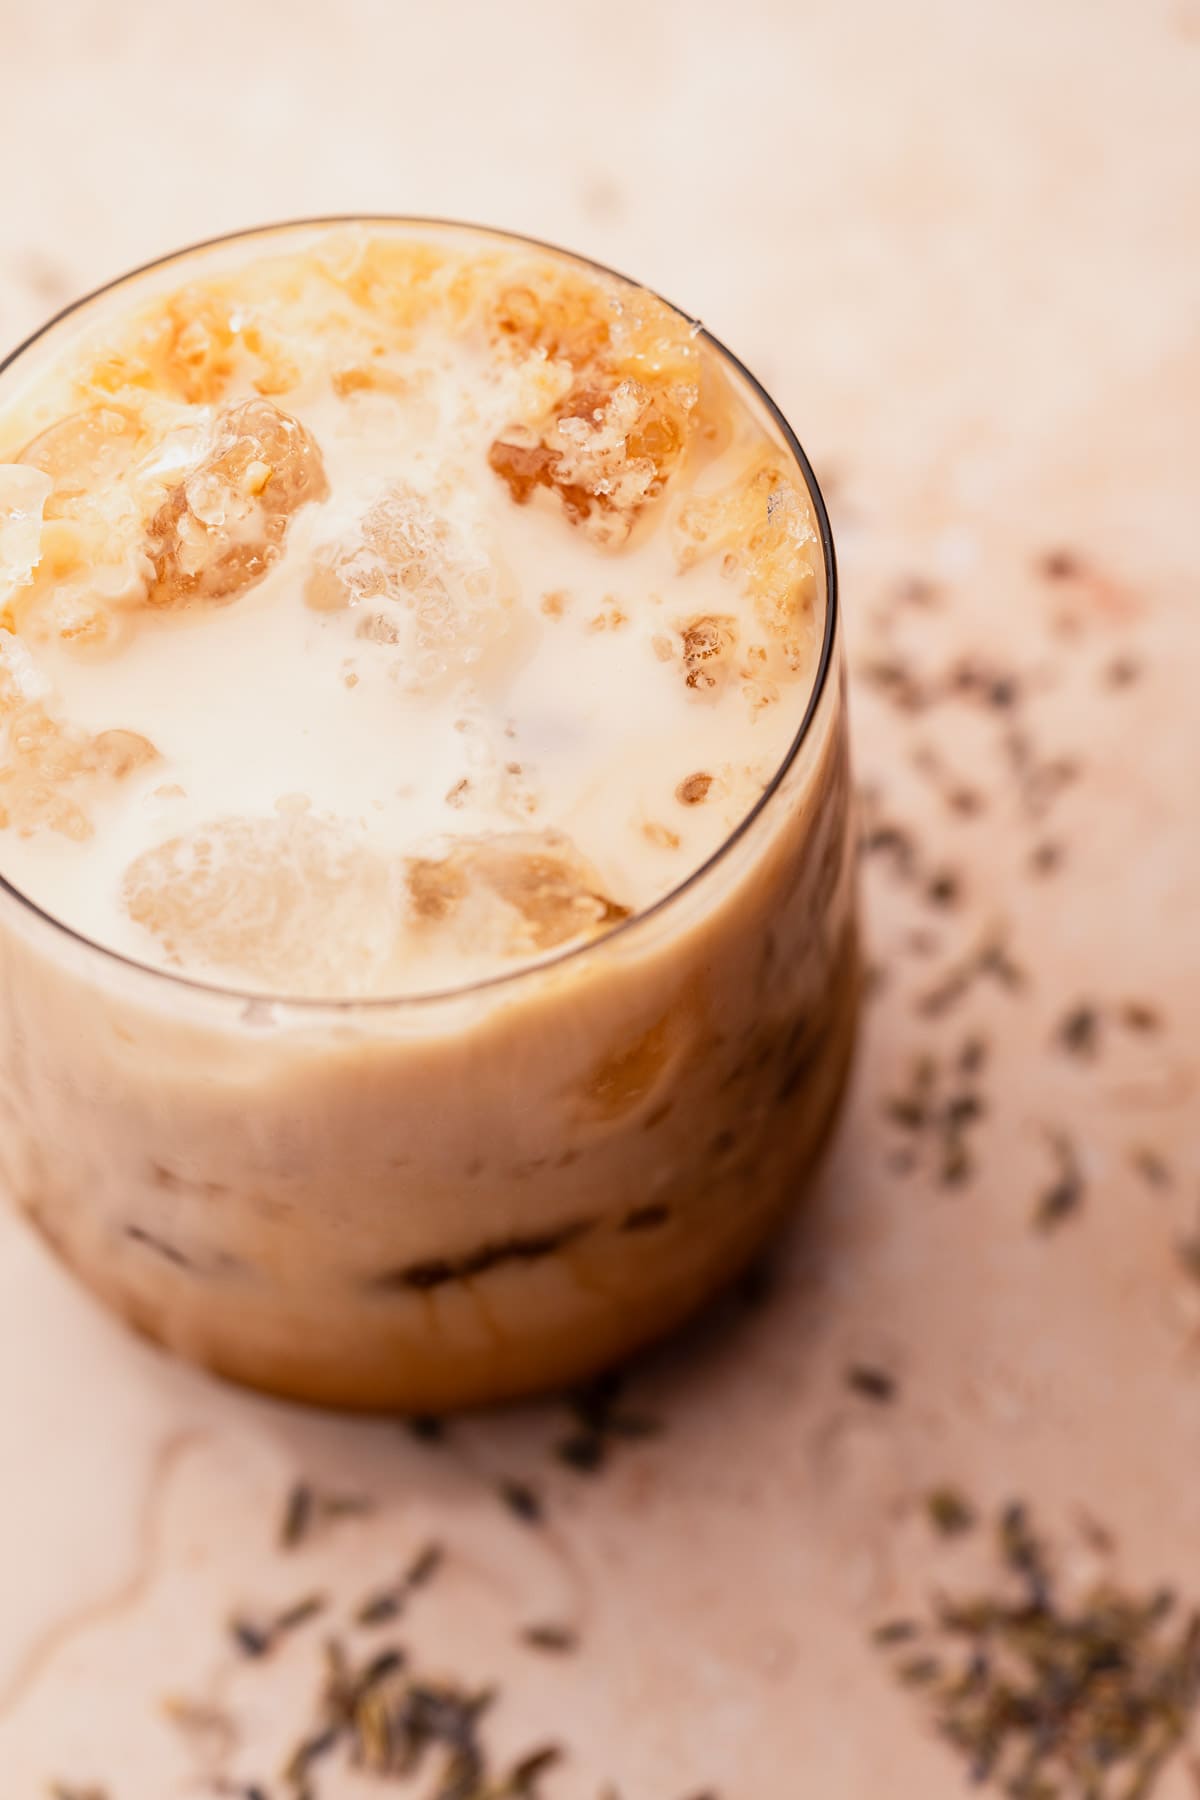 A glass of iced lavender oatmilk latte on a textured surface.